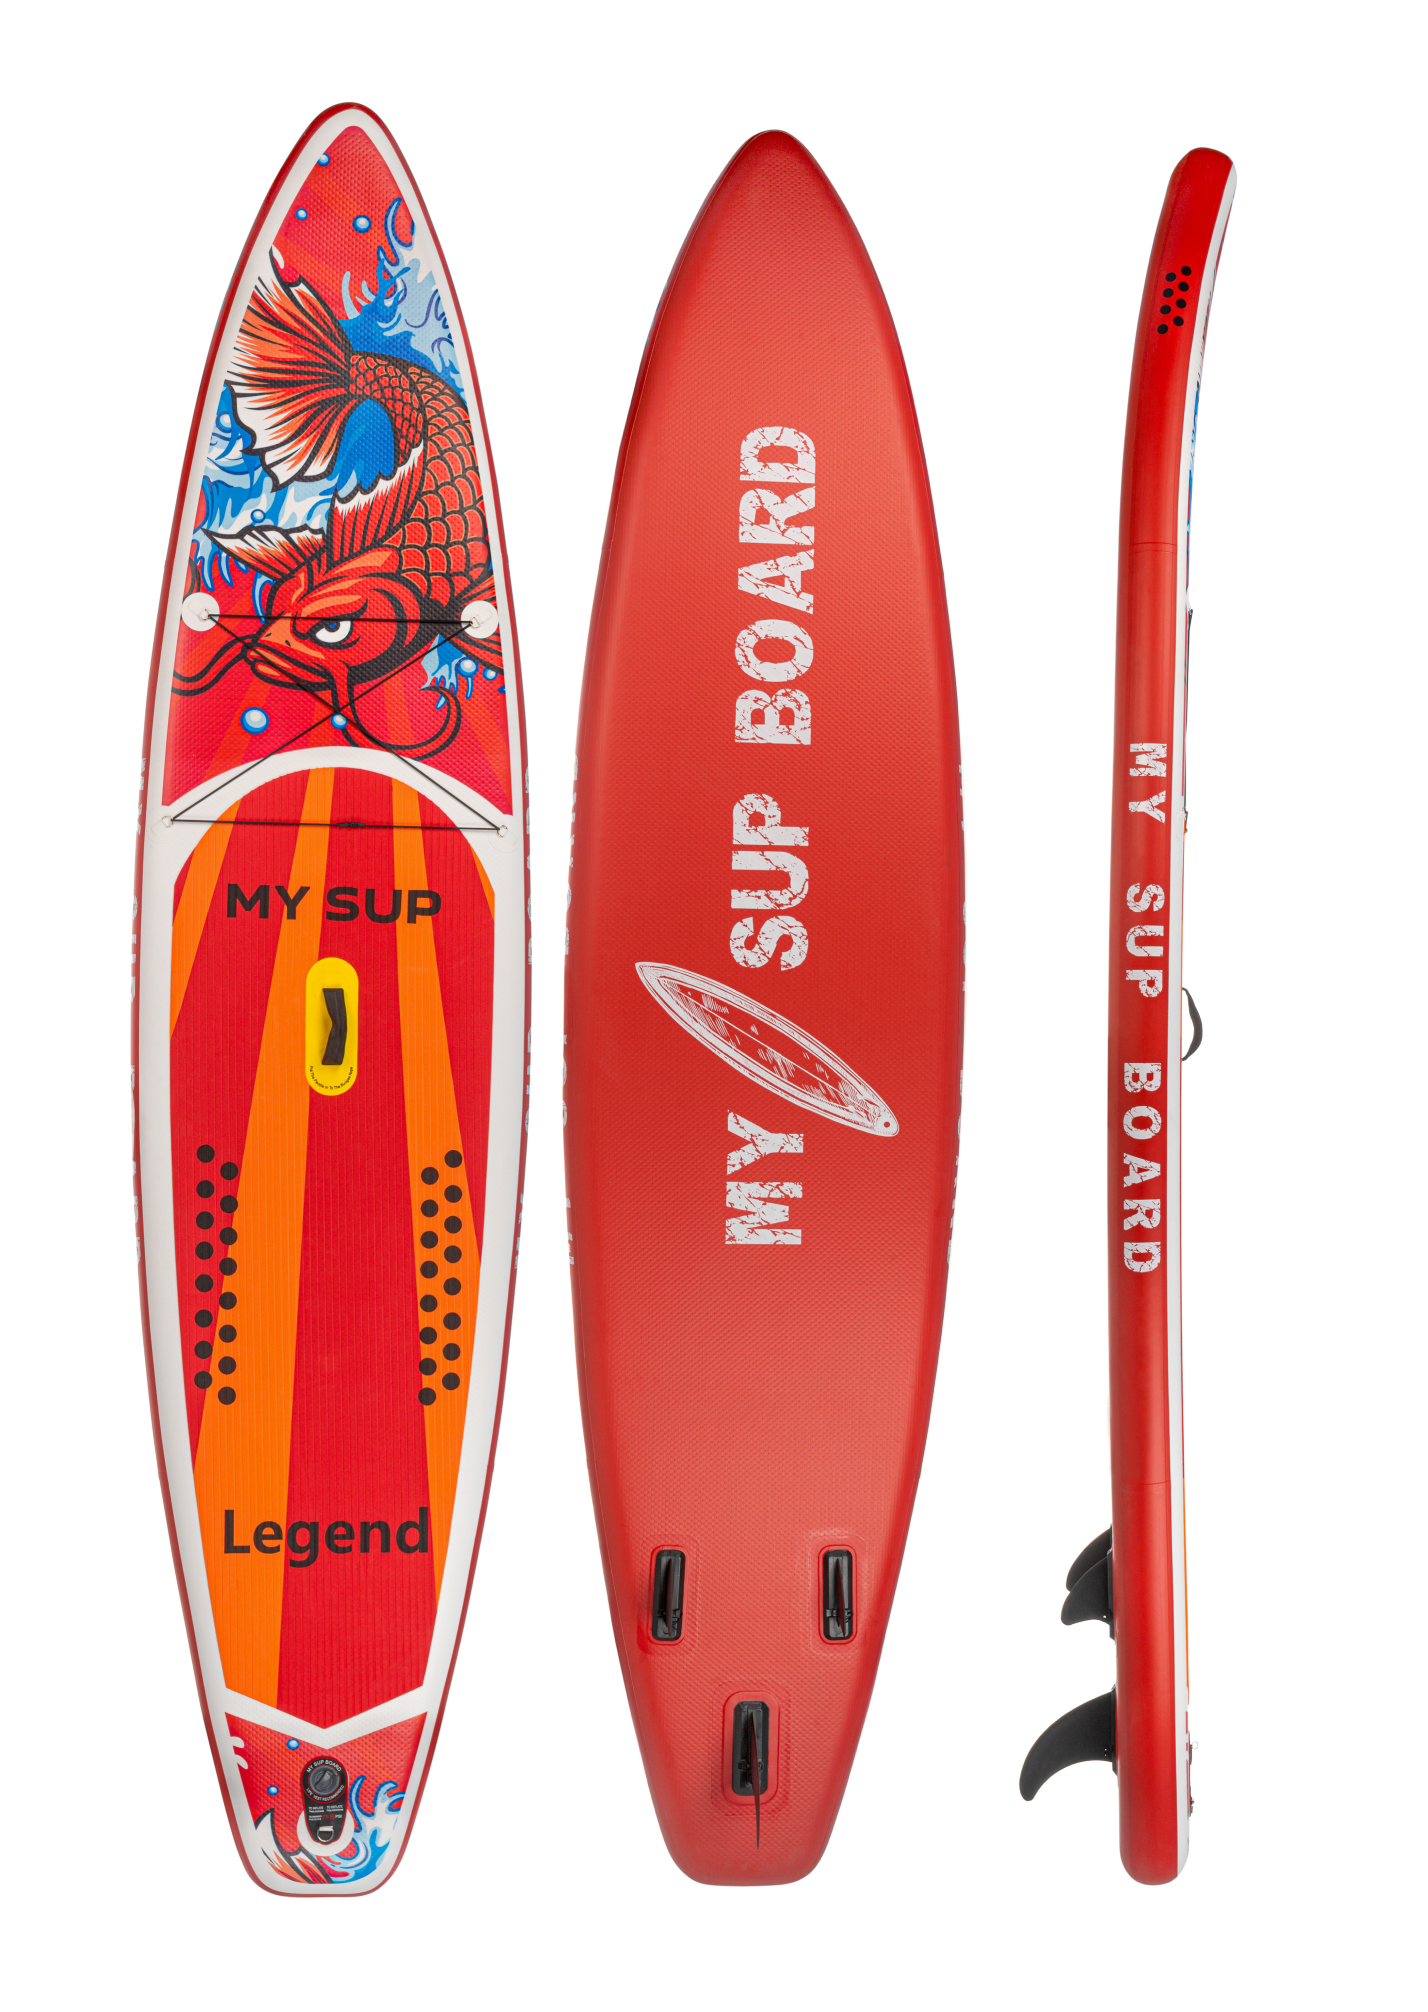 SUP-борд My SUP Legend 12.6 385x84x15 см red